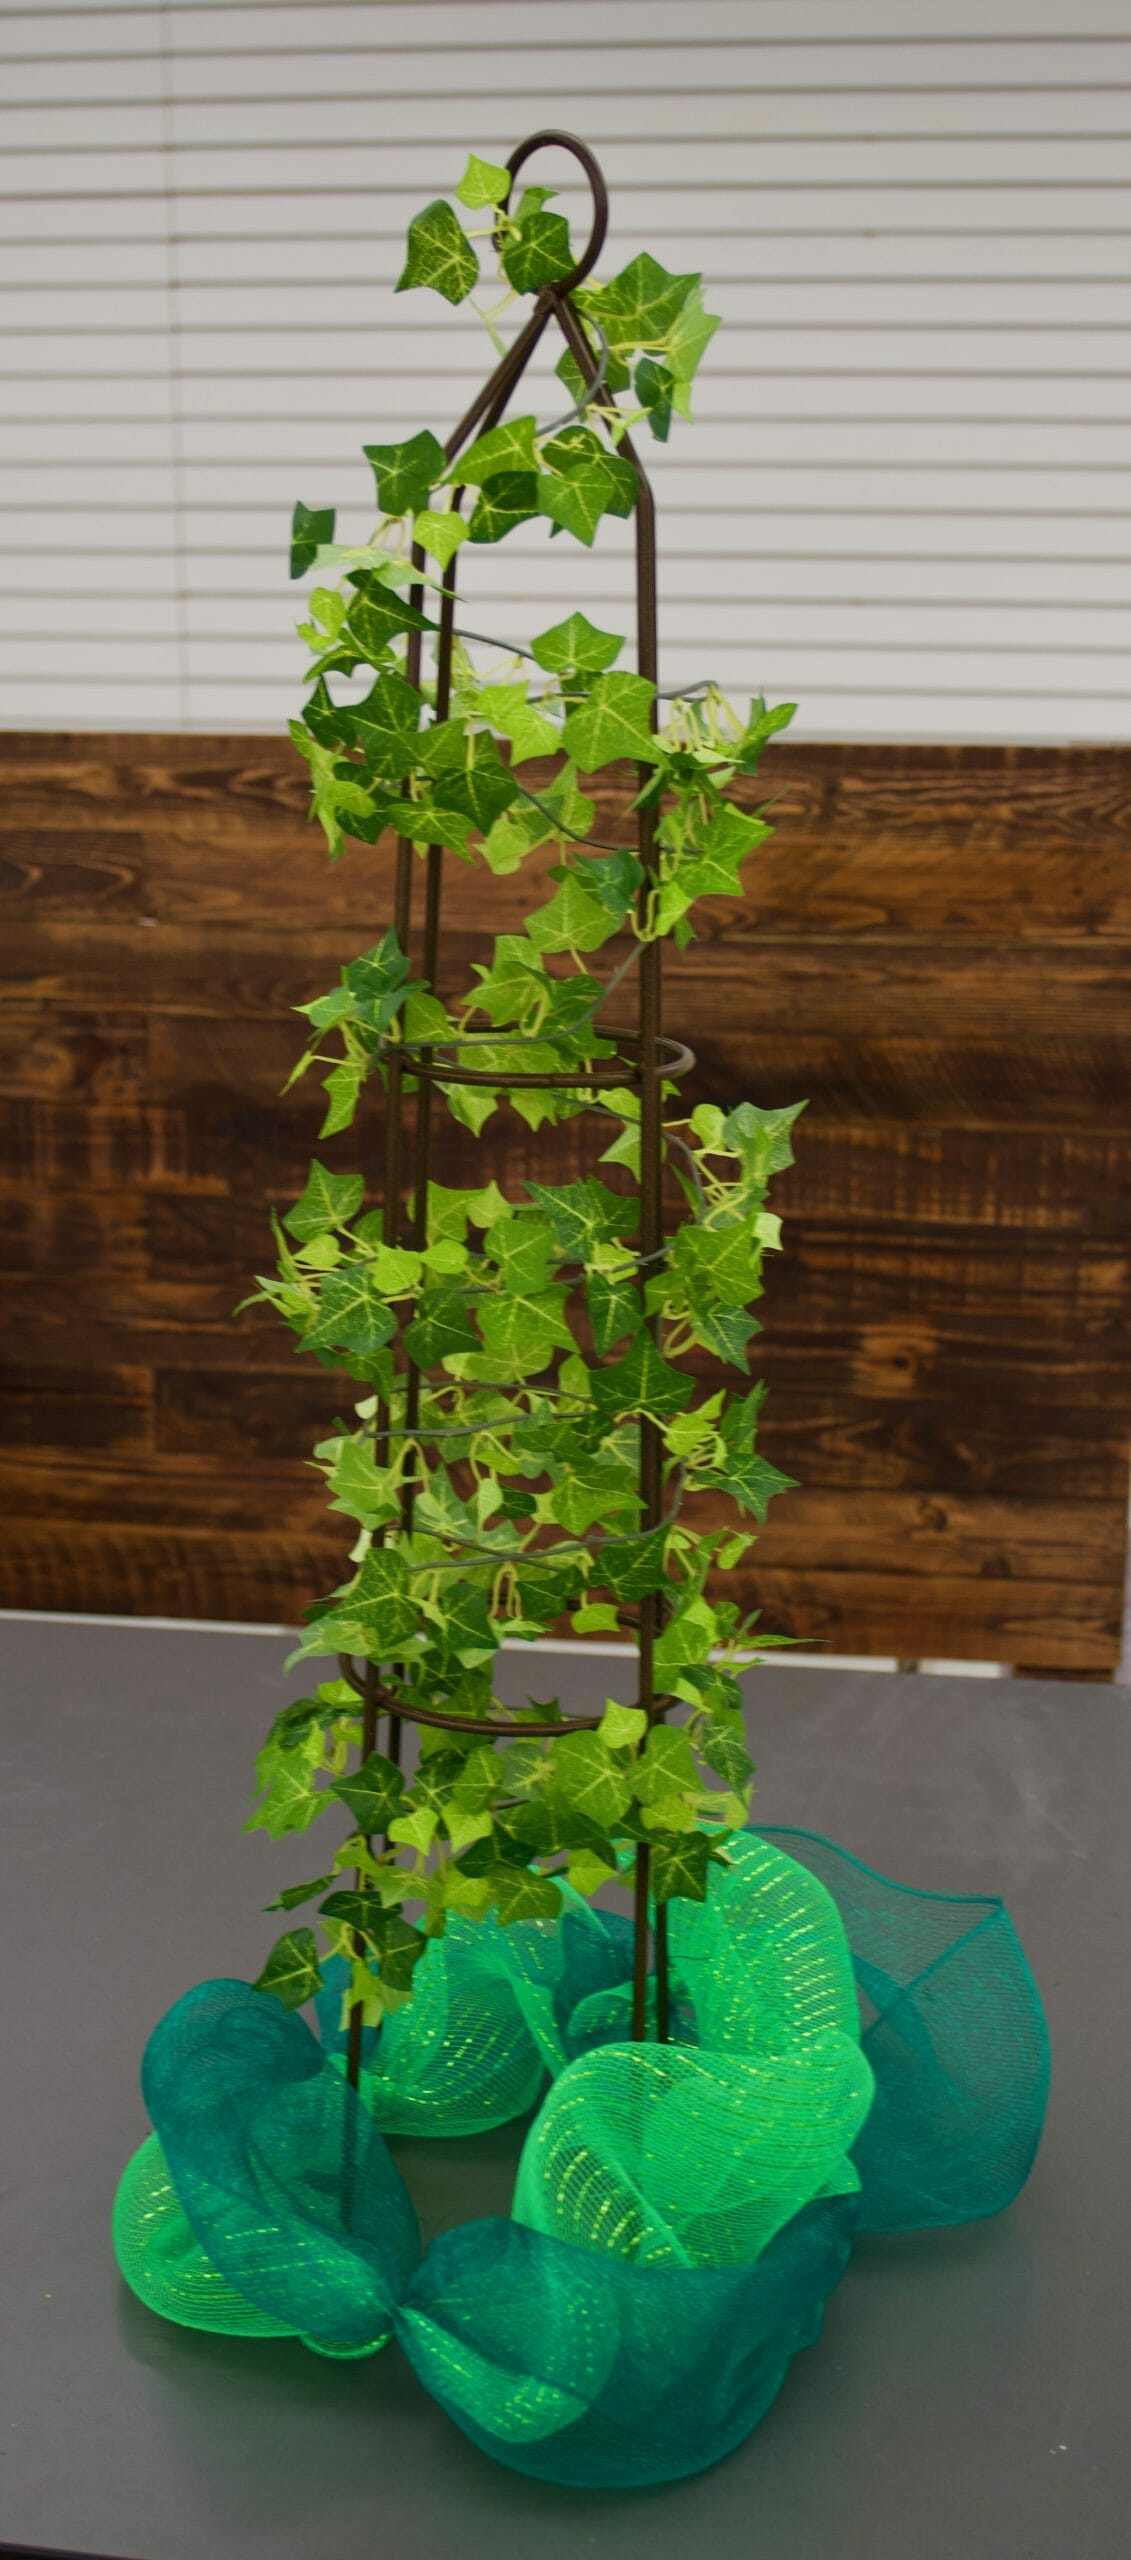 ivy climbing on stand with green mesh garland